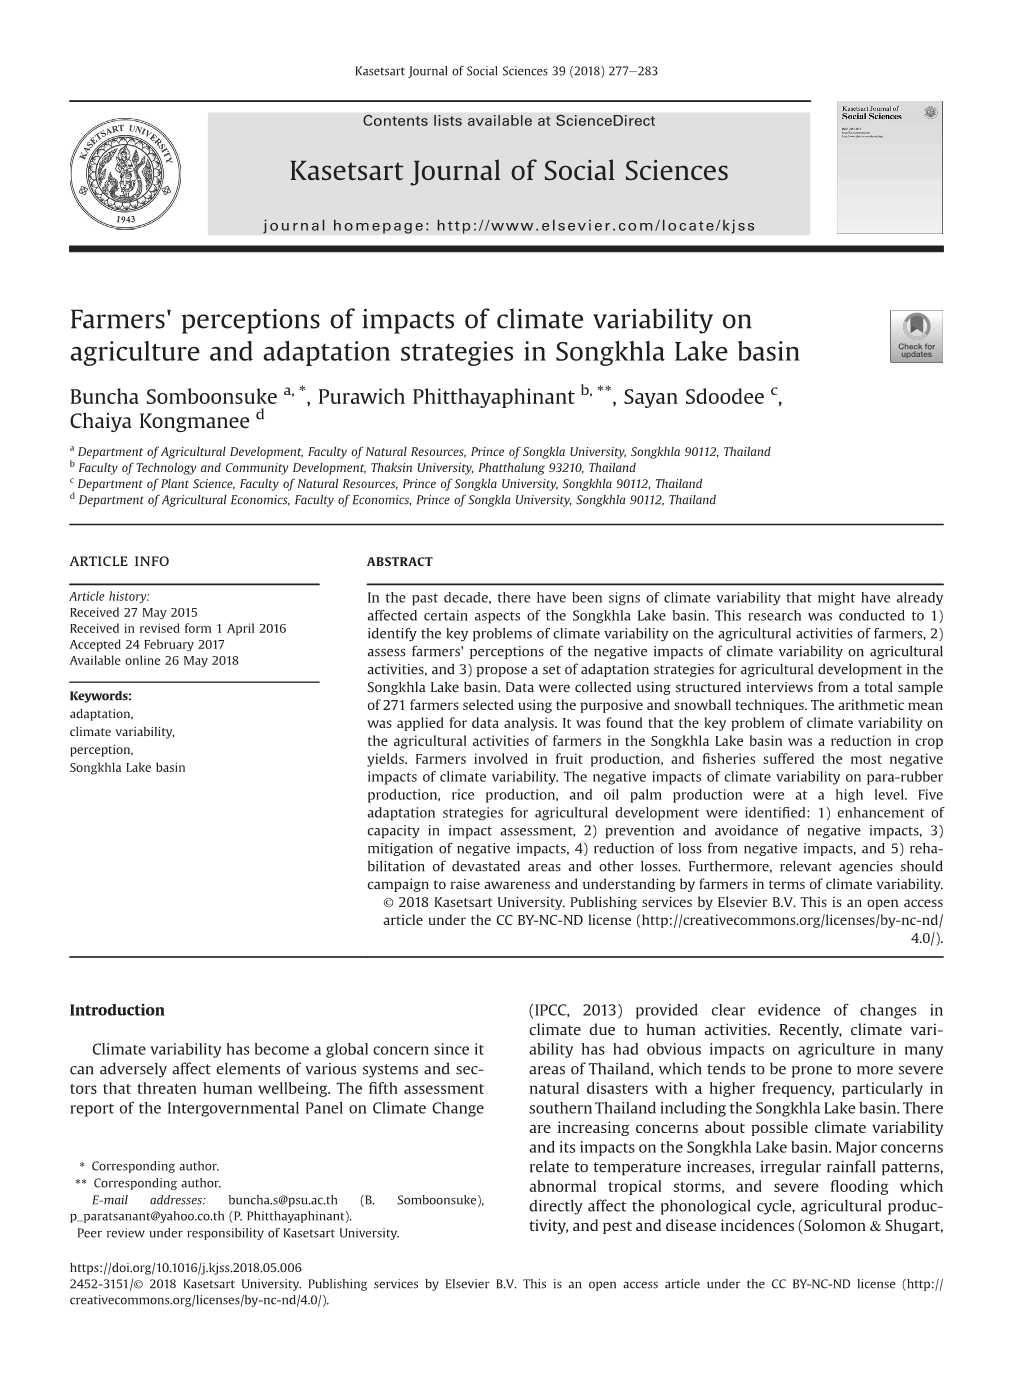 Farmers' Perceptions of Impacts of Climate Variability on Agriculture and Adaptation Strategies in Songkhla Lake Basin Kasetsart